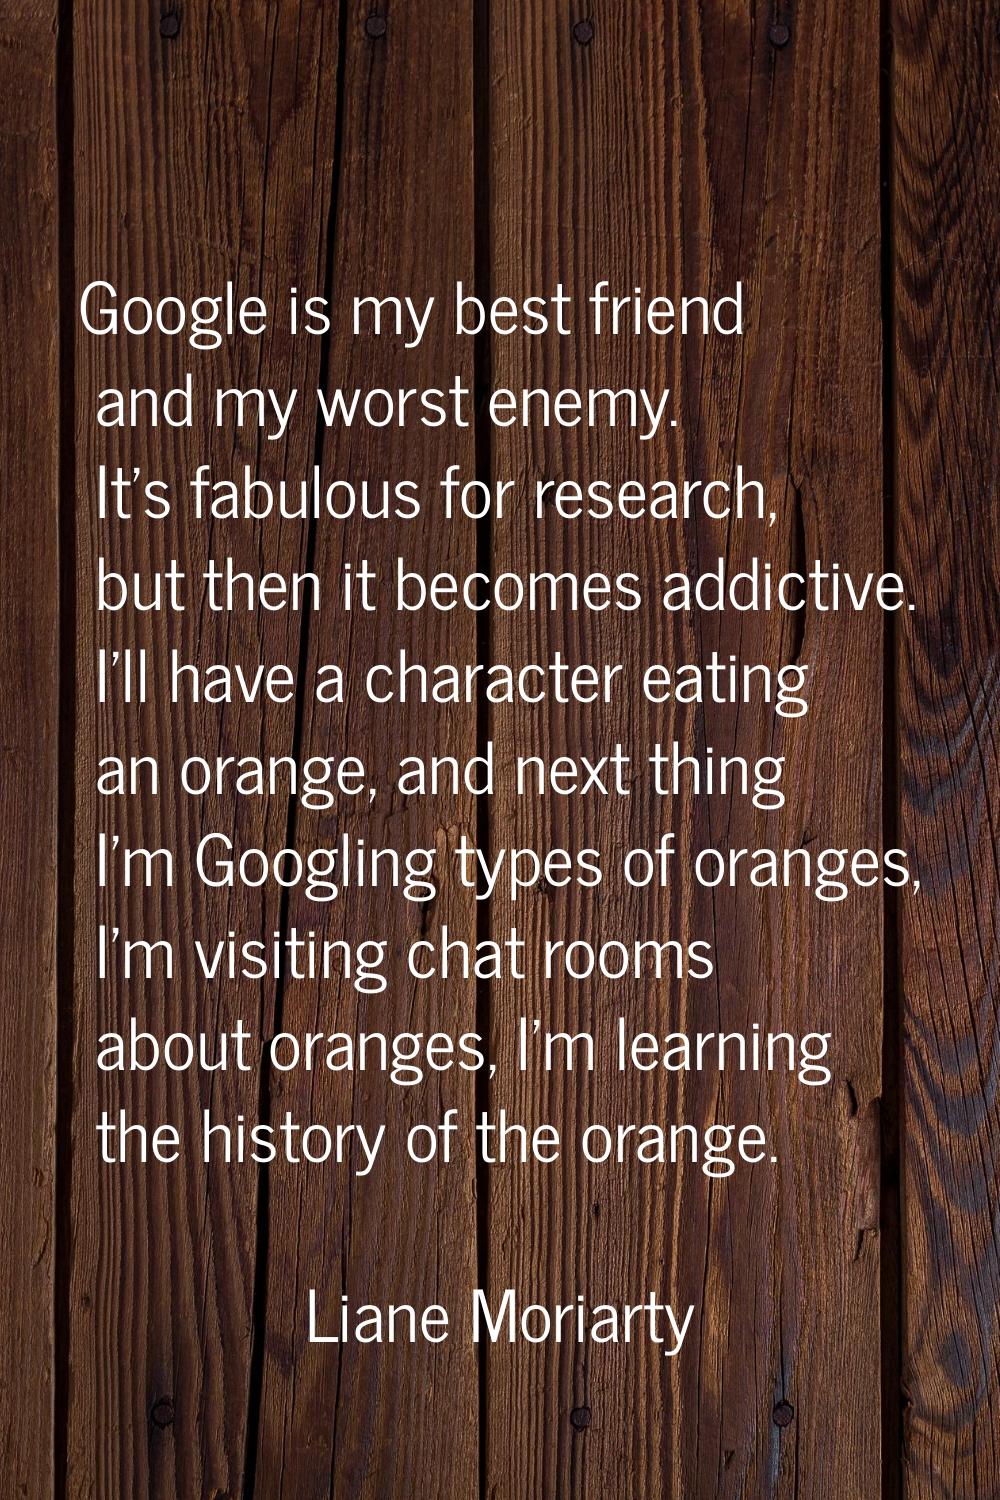 Google is my best friend and my worst enemy. It's fabulous for research, but then it becomes addict